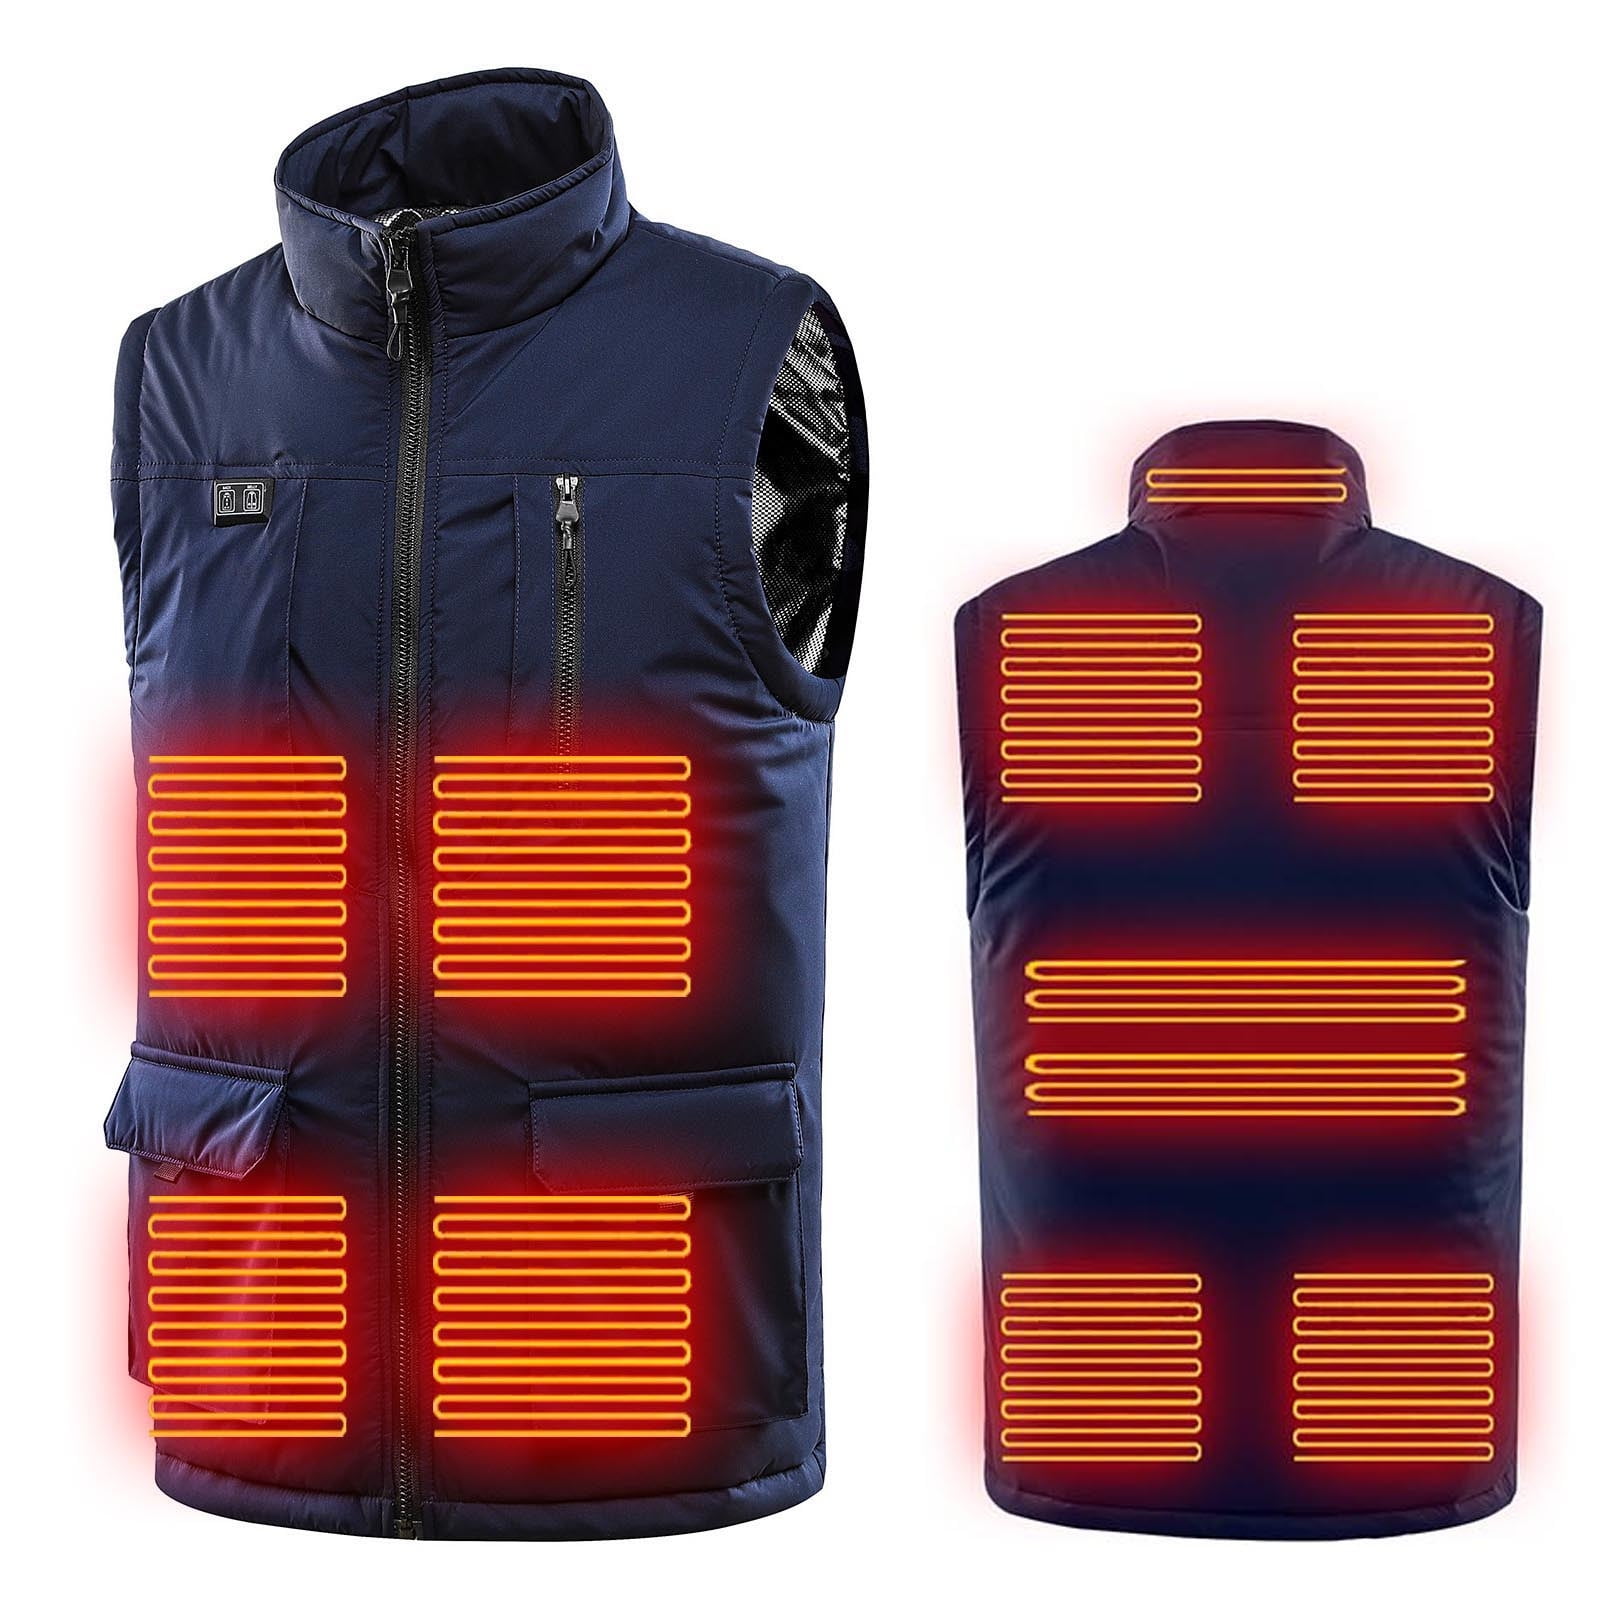 Walking Hiking GULE GULE Under Heated Vest Adjustable Size with Zipper Suitable for Plus Size Men and Women Outdoor Traveling Motorcycle Biking